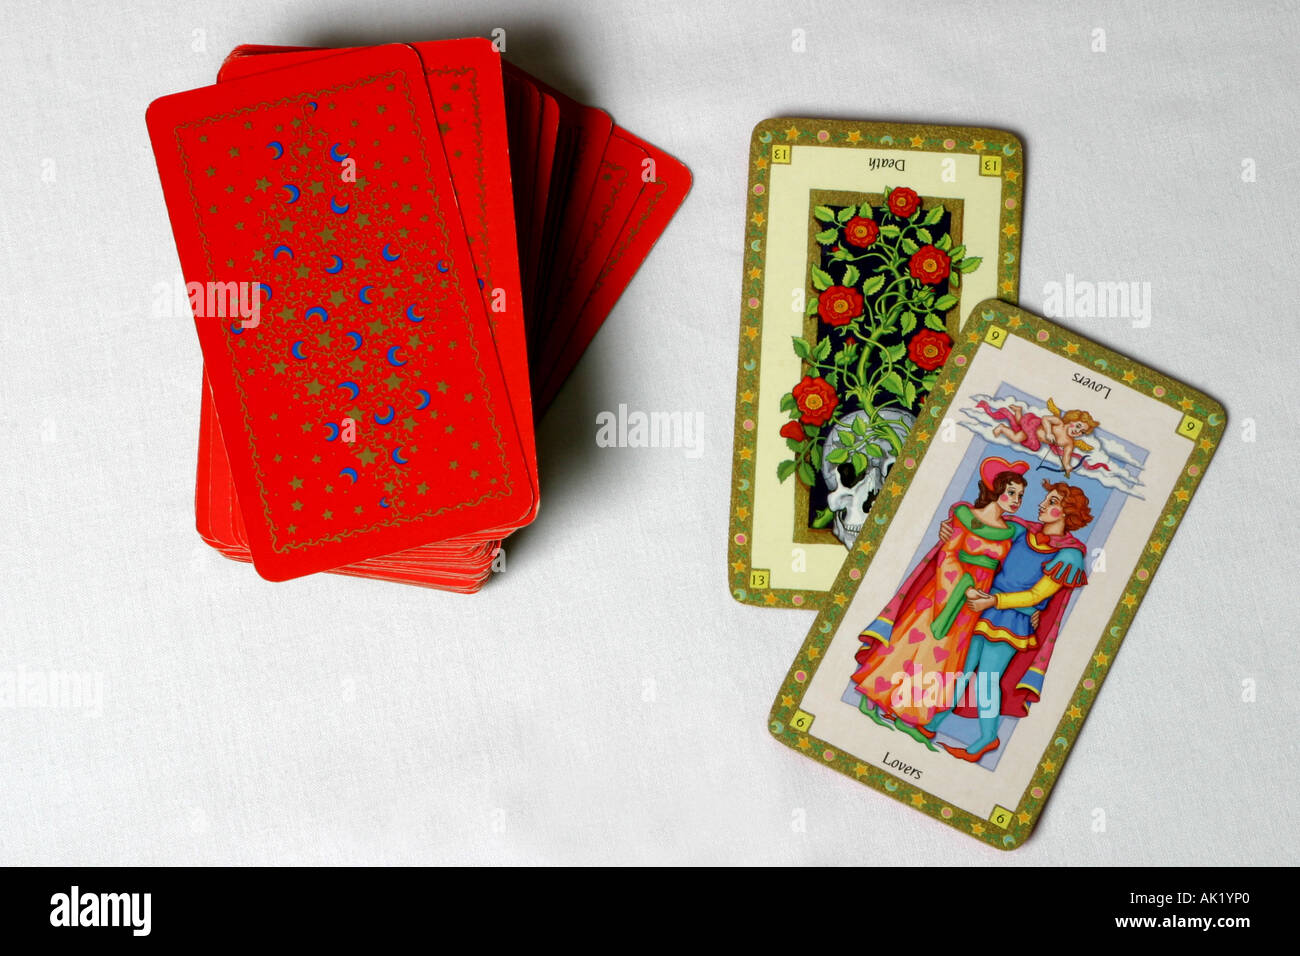 The Death card and the lovers card in a pack of Tarot. Stock Photo